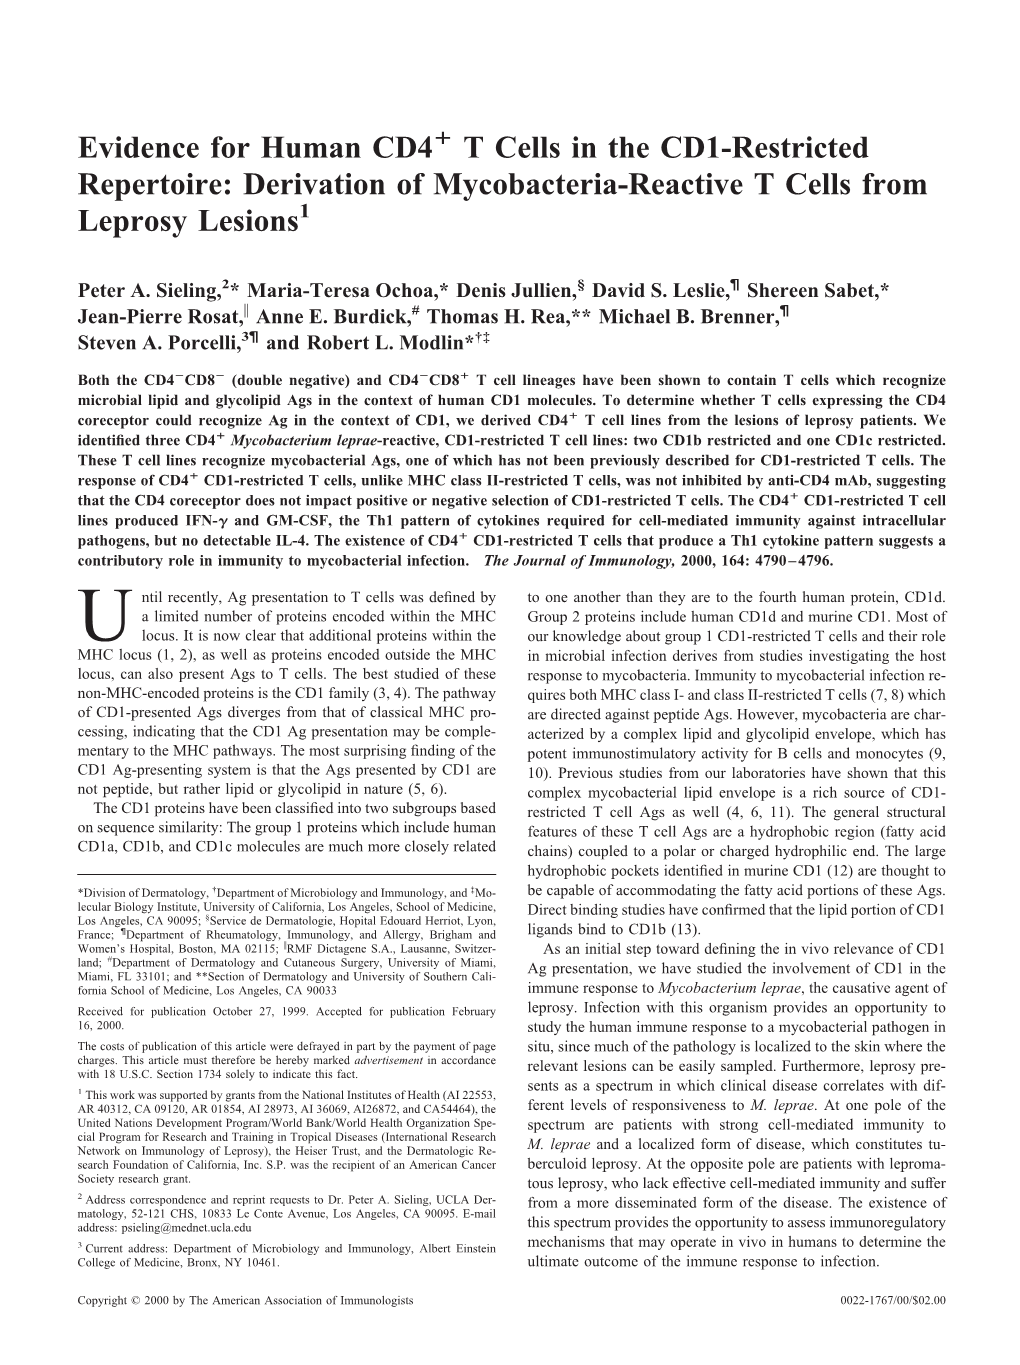 Evidence for Human CD4 T Cells in the CD1-Restricted Repertoire: Derivation of Mycobacteria-Reactive T Cells from Leprosy Lesion